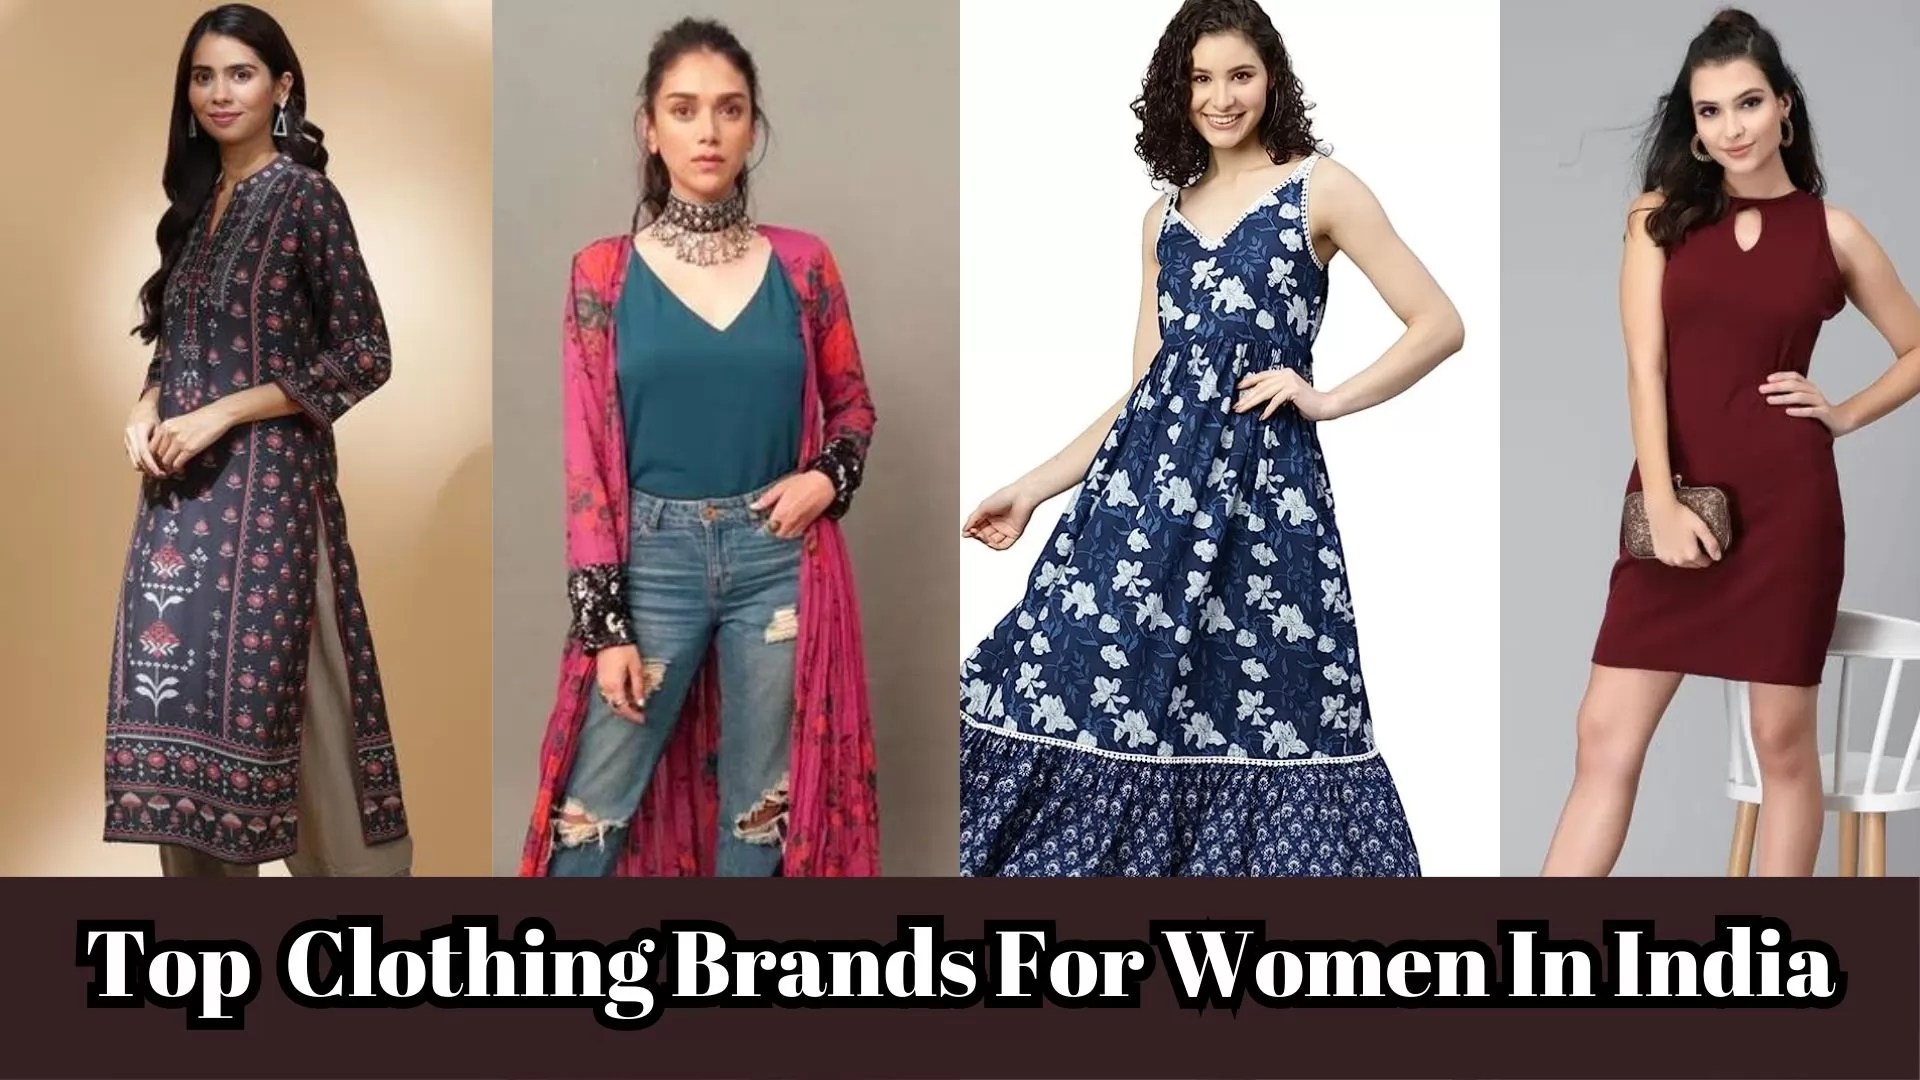 23 AAPI-Owned Fashion Brands to Shop Right Now - PureWow